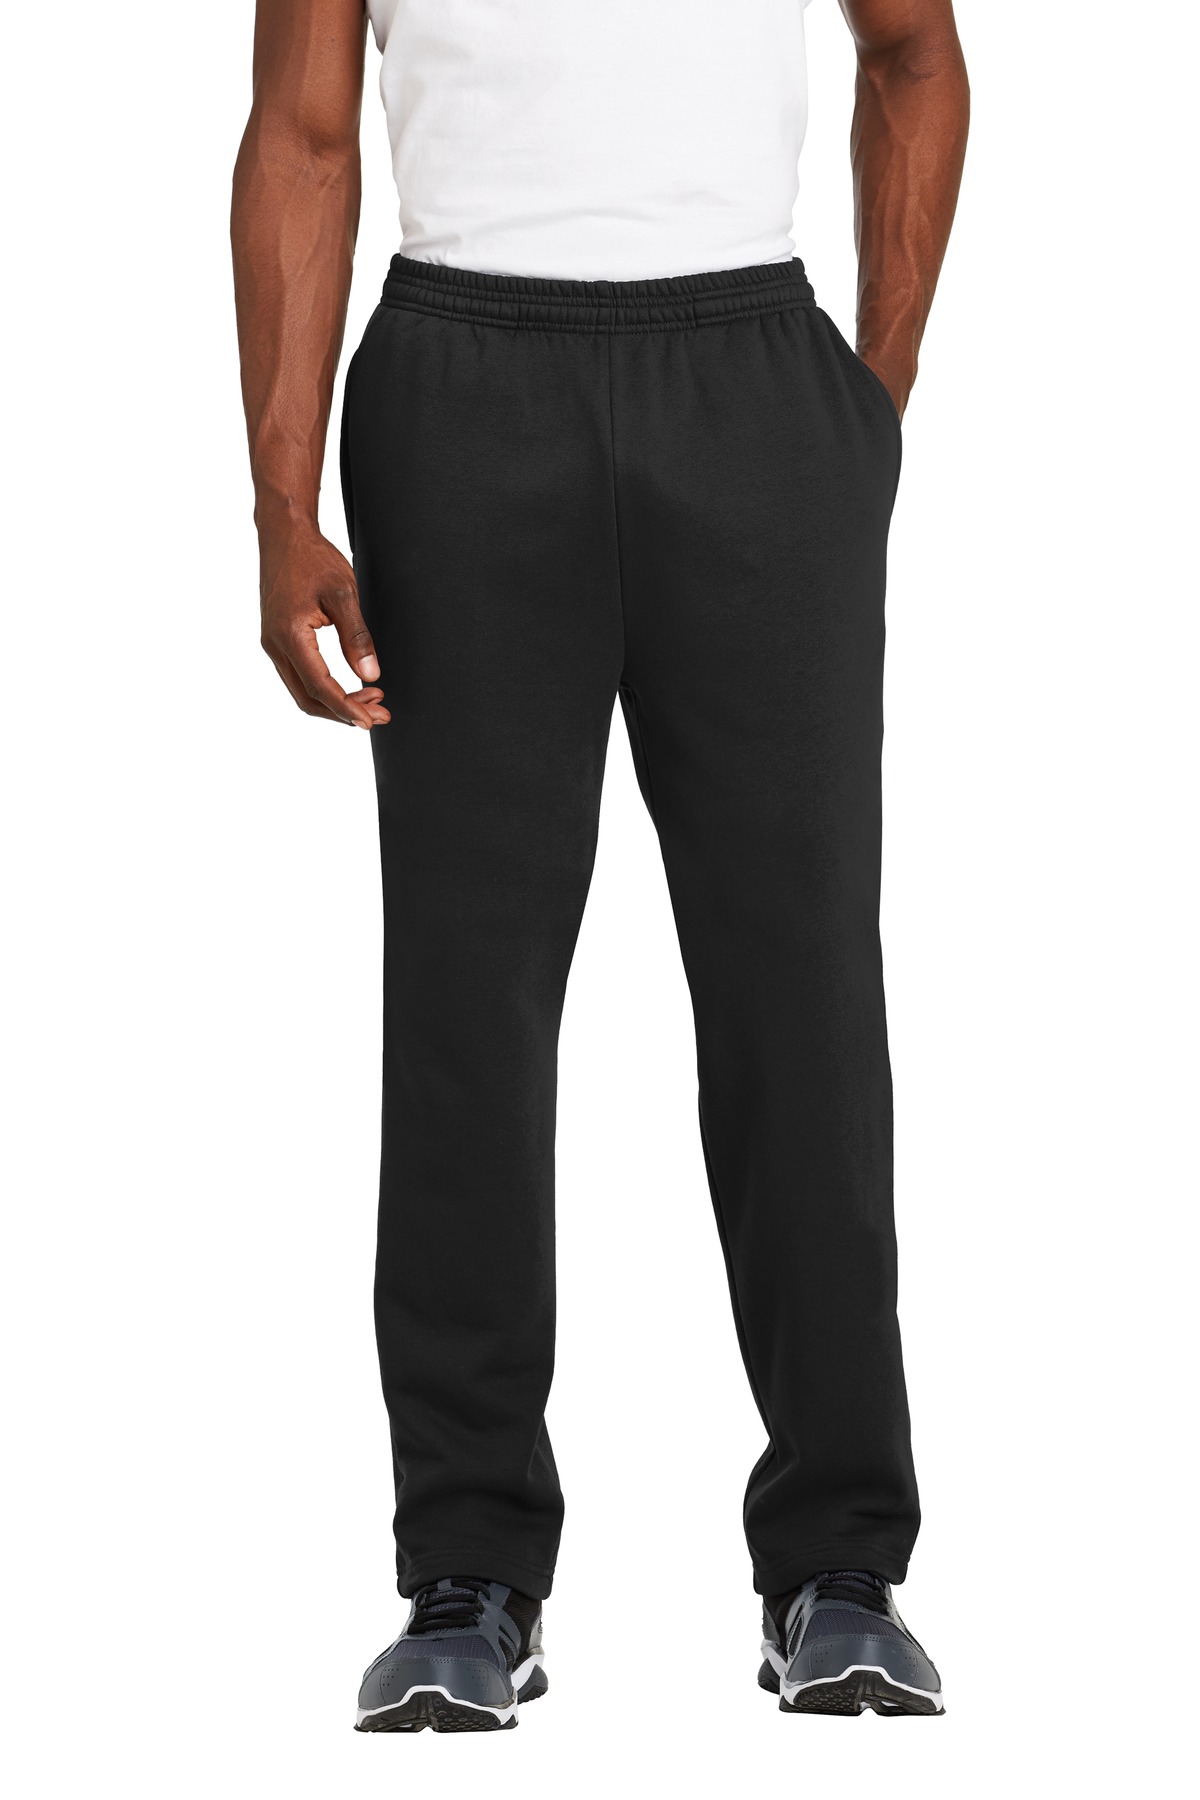 Front view of Open Bottom Sweatpant